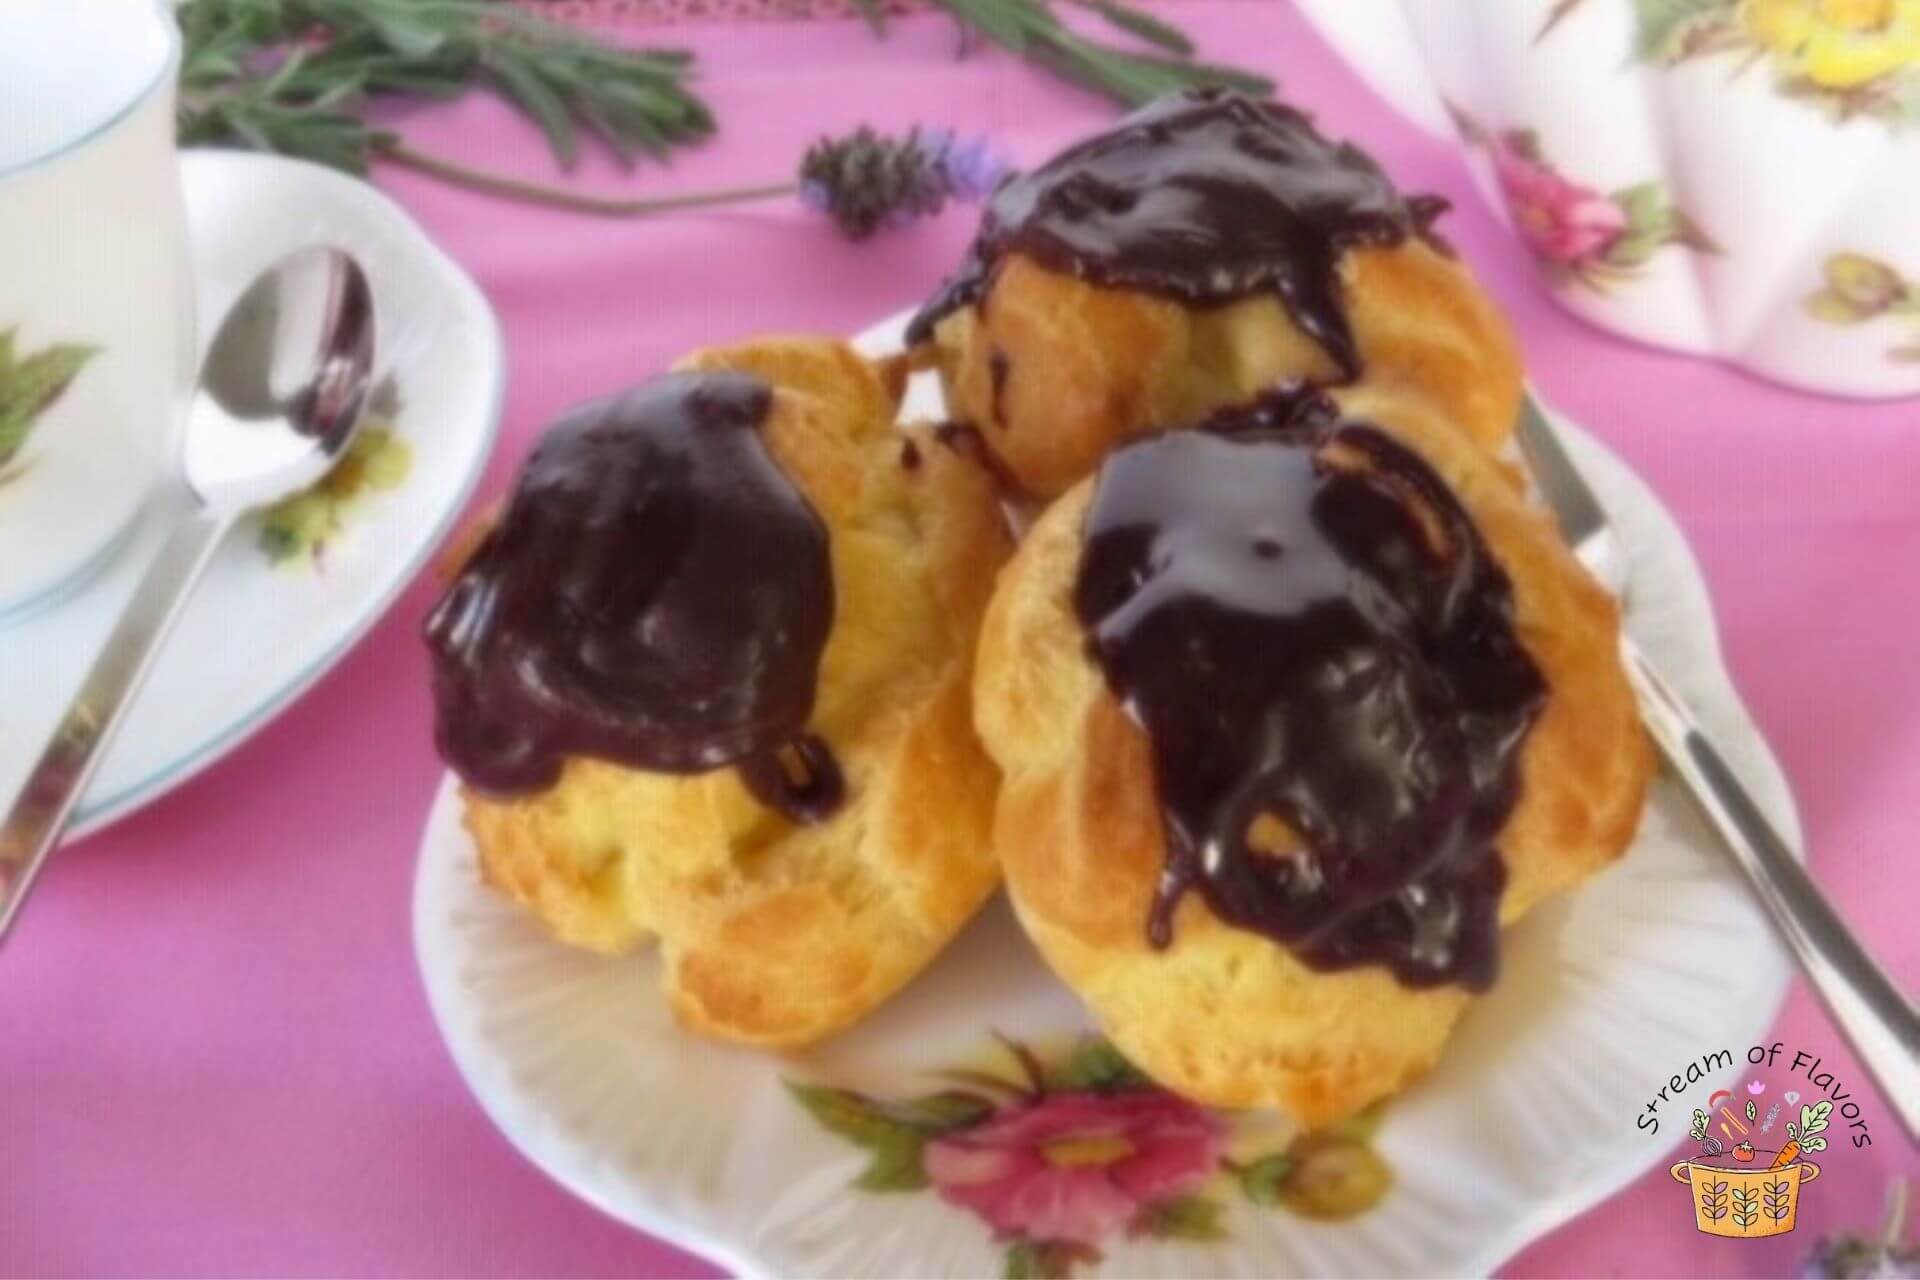 Profiteroles with chocolate sauce on a plate